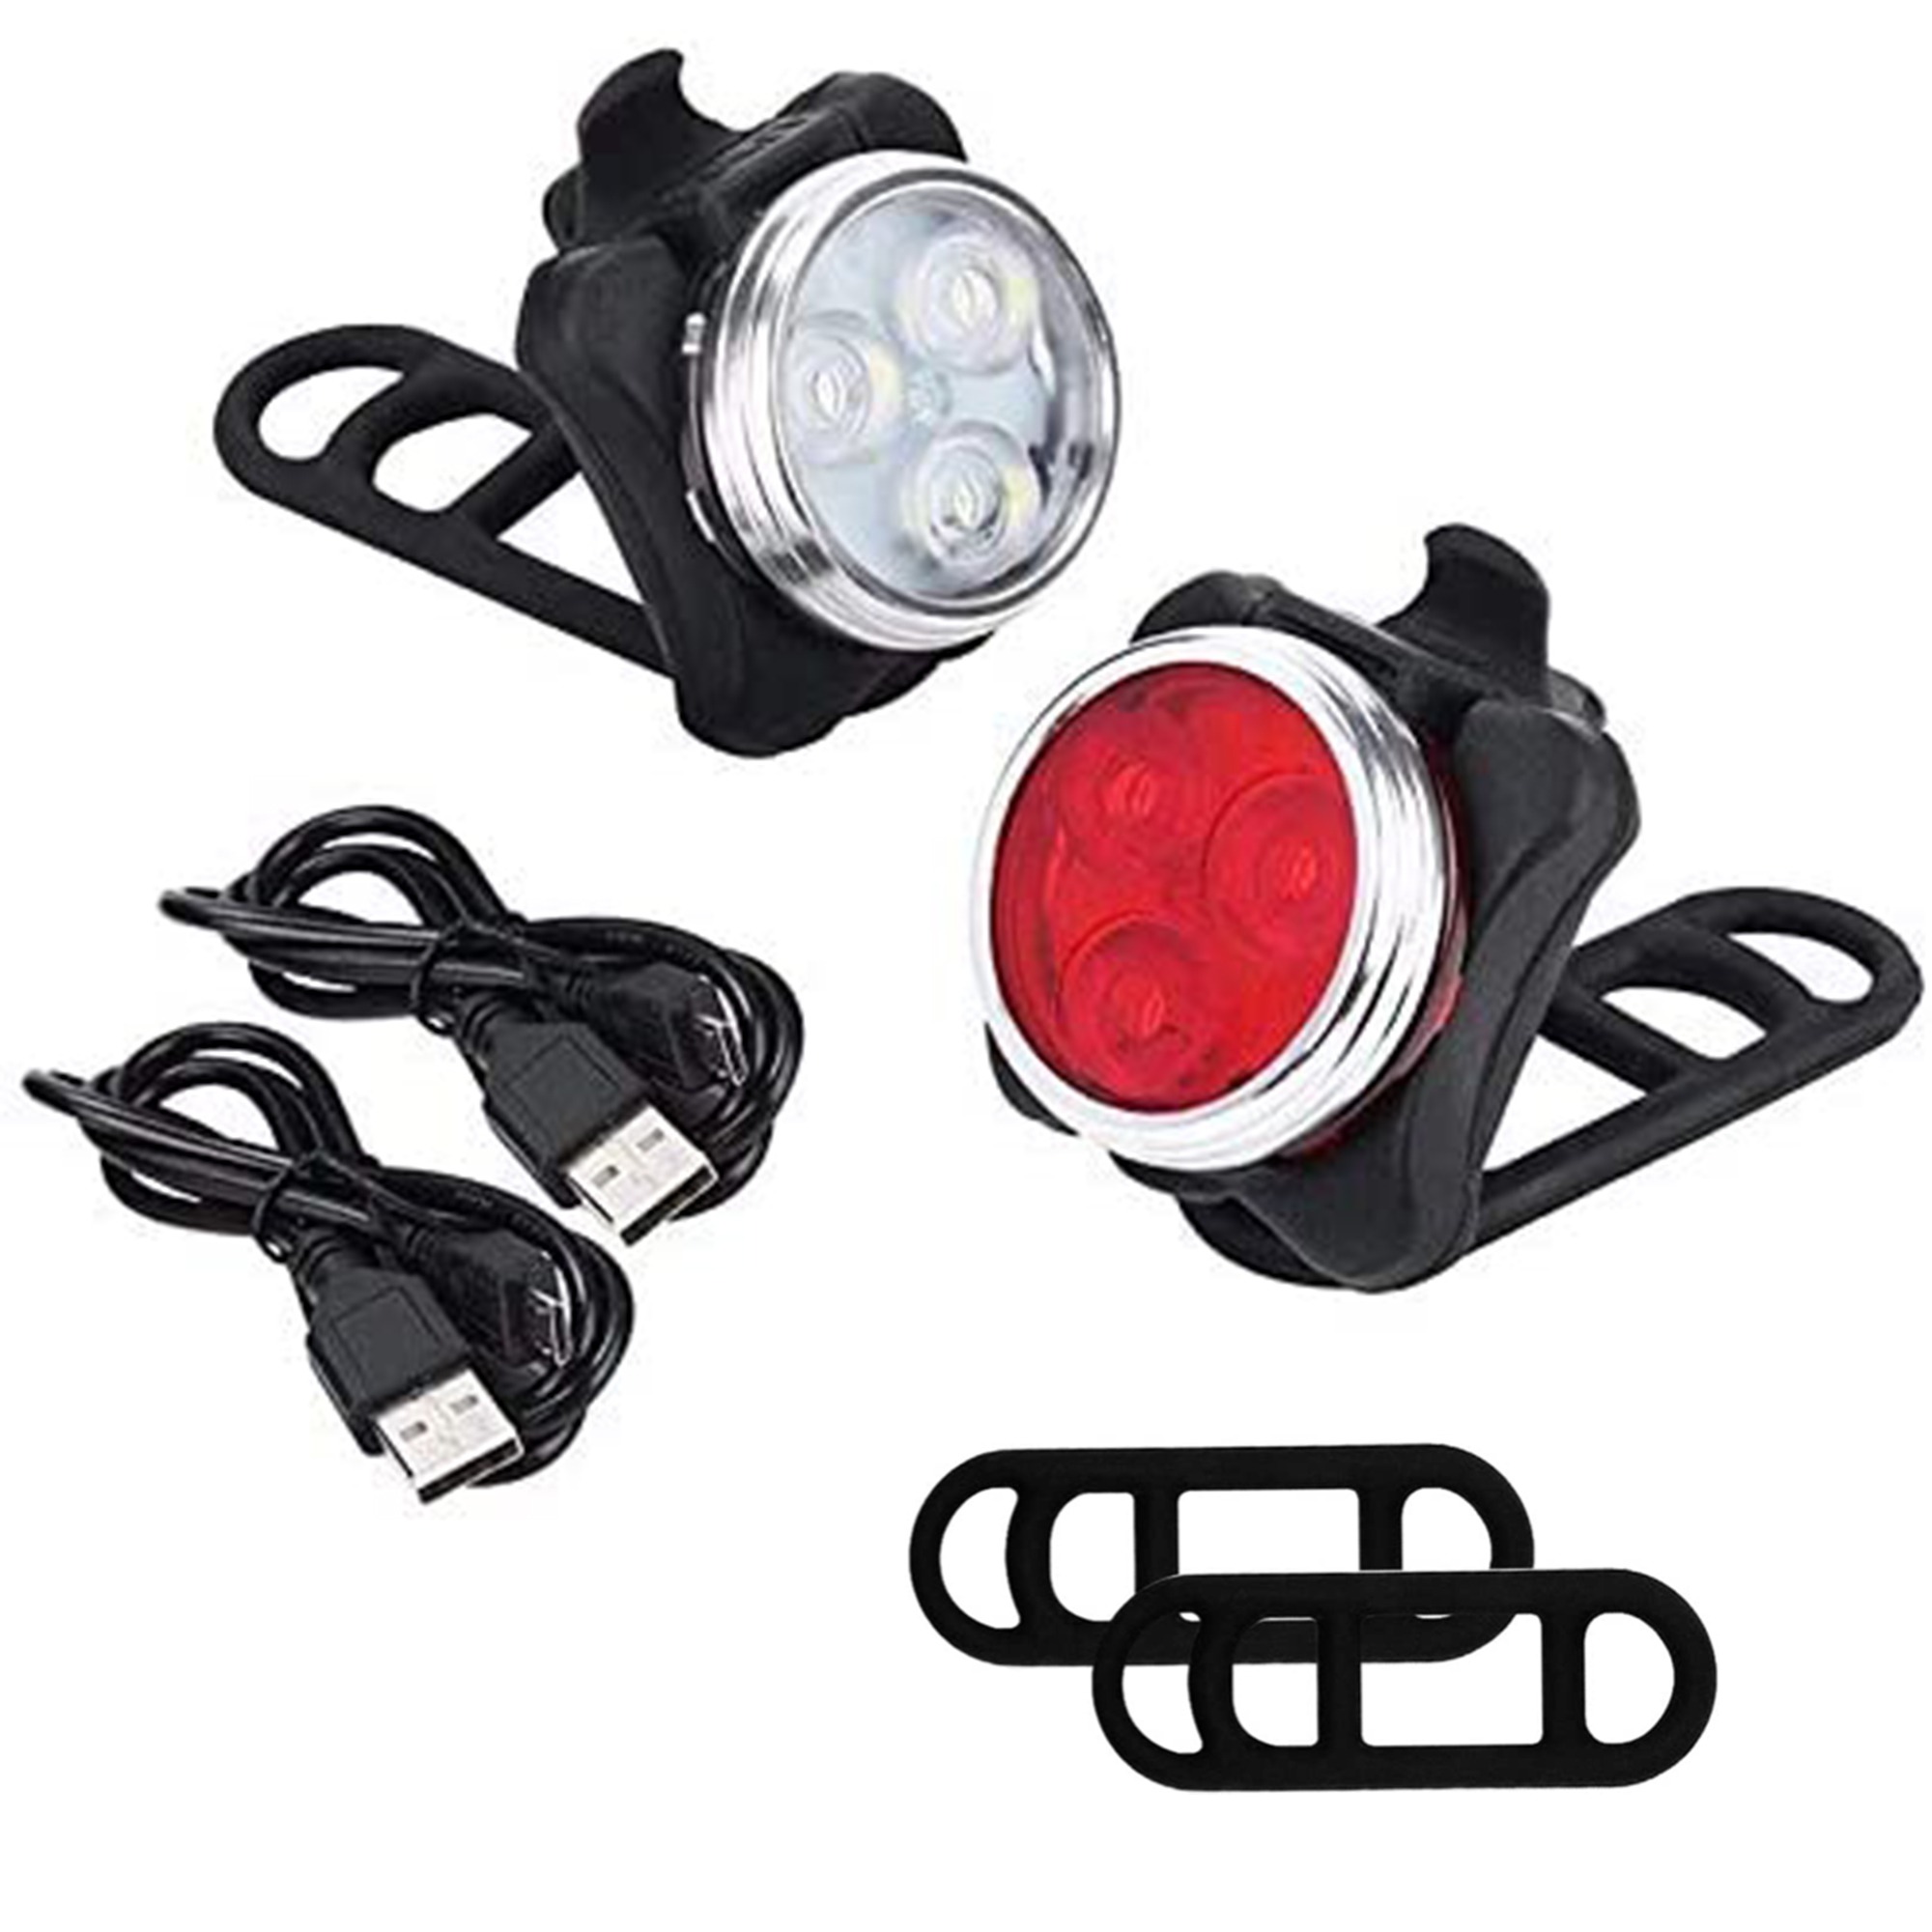 Super Bright Bicycle Lights IP65 Waterproof Free Tail Light and Helmet Mount Include LED Bicycle Lights Front and Rear,Derlson Bike Lights Set 